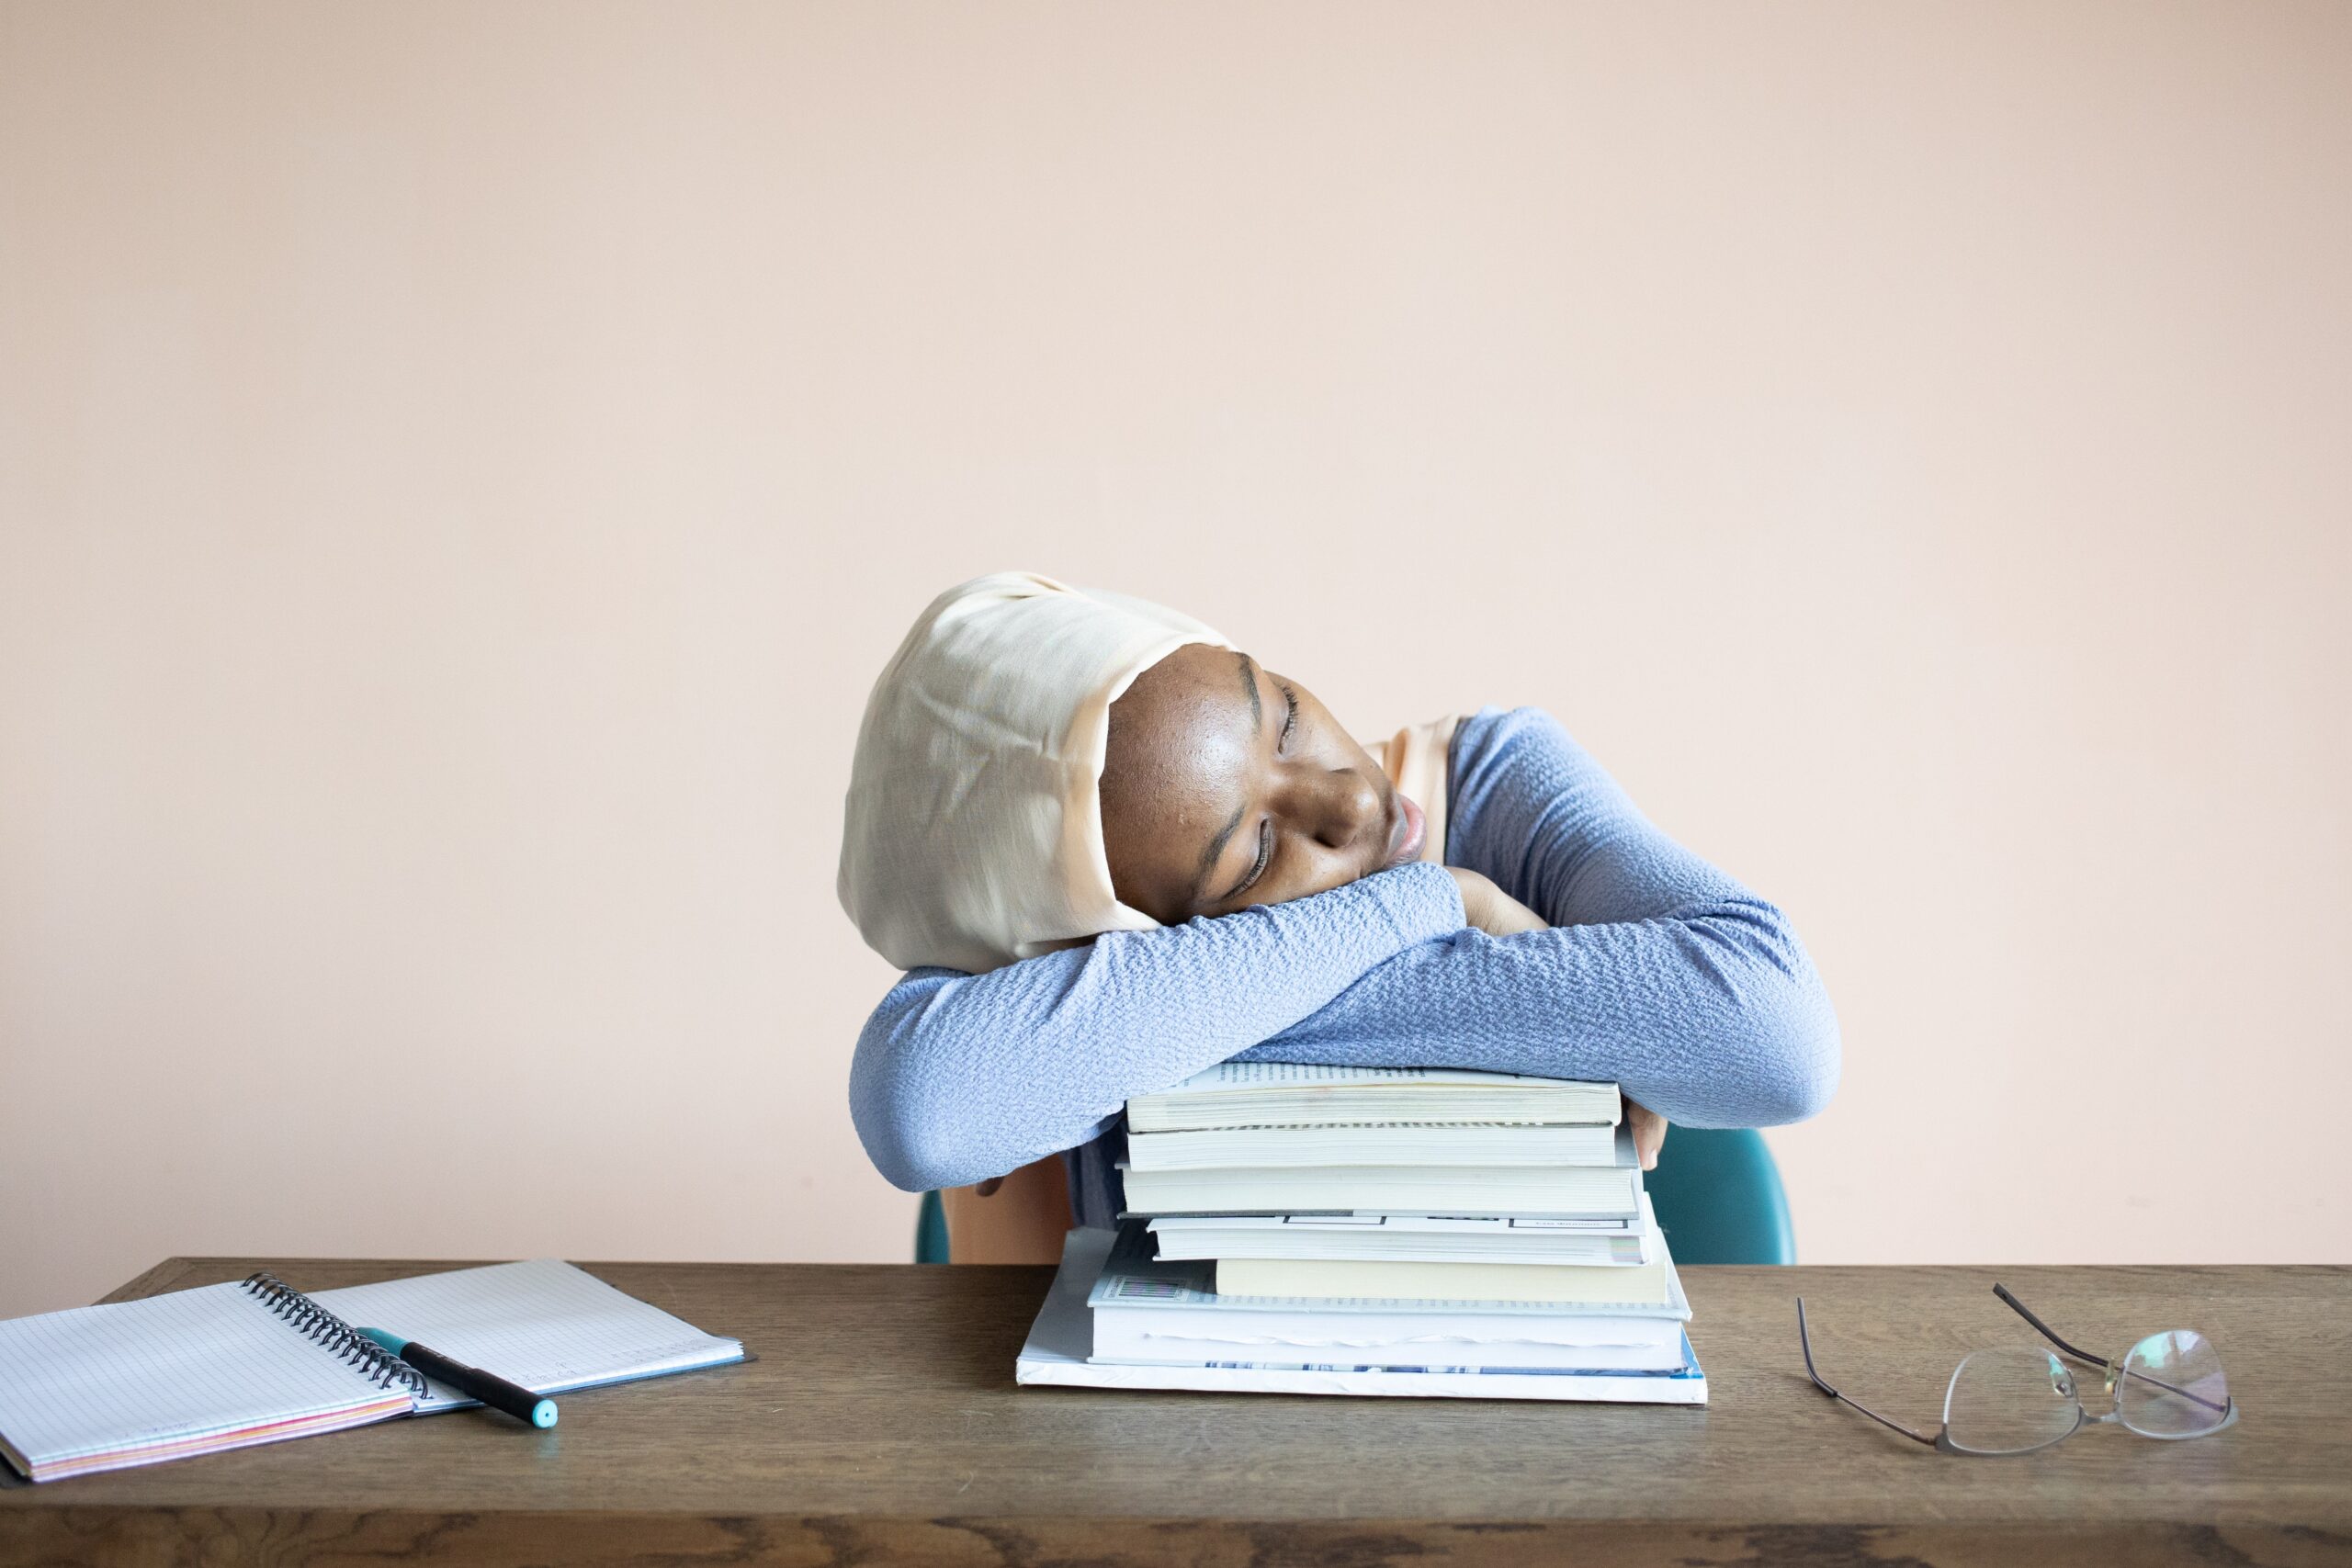 How Low Self-Esteem May Be a Hidden Cause of Procrastination